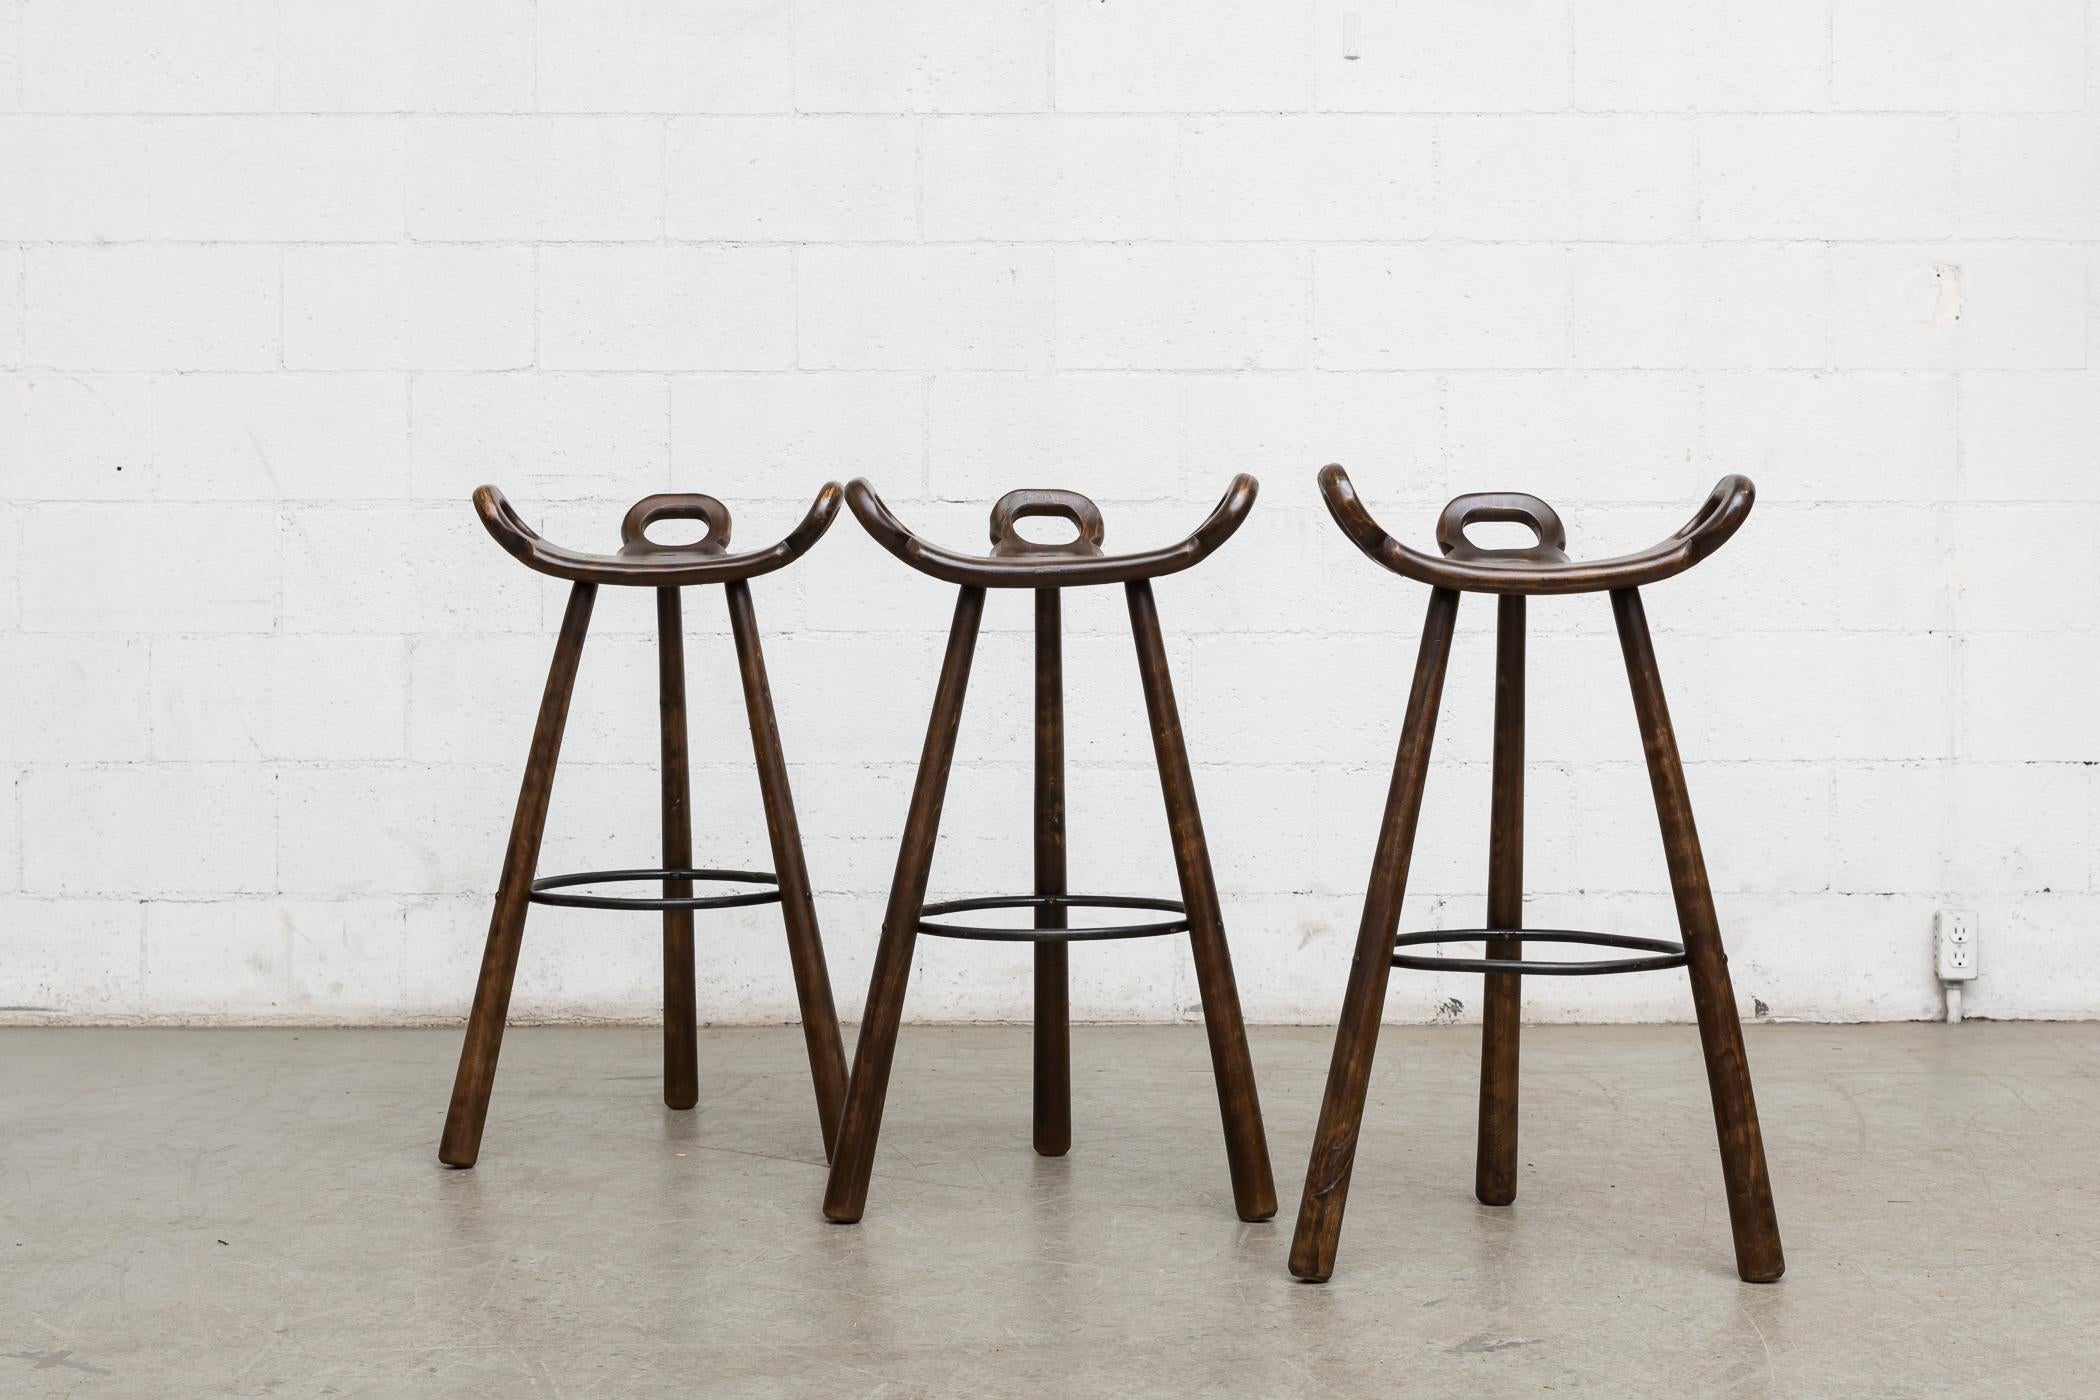 Set of 3 lightly refinished Spanish brutalist bar stools by Sergio Rodriguez. Dark oak frames with black enameled metal circular foot rests. Wear consistent with age and usage. Set price.